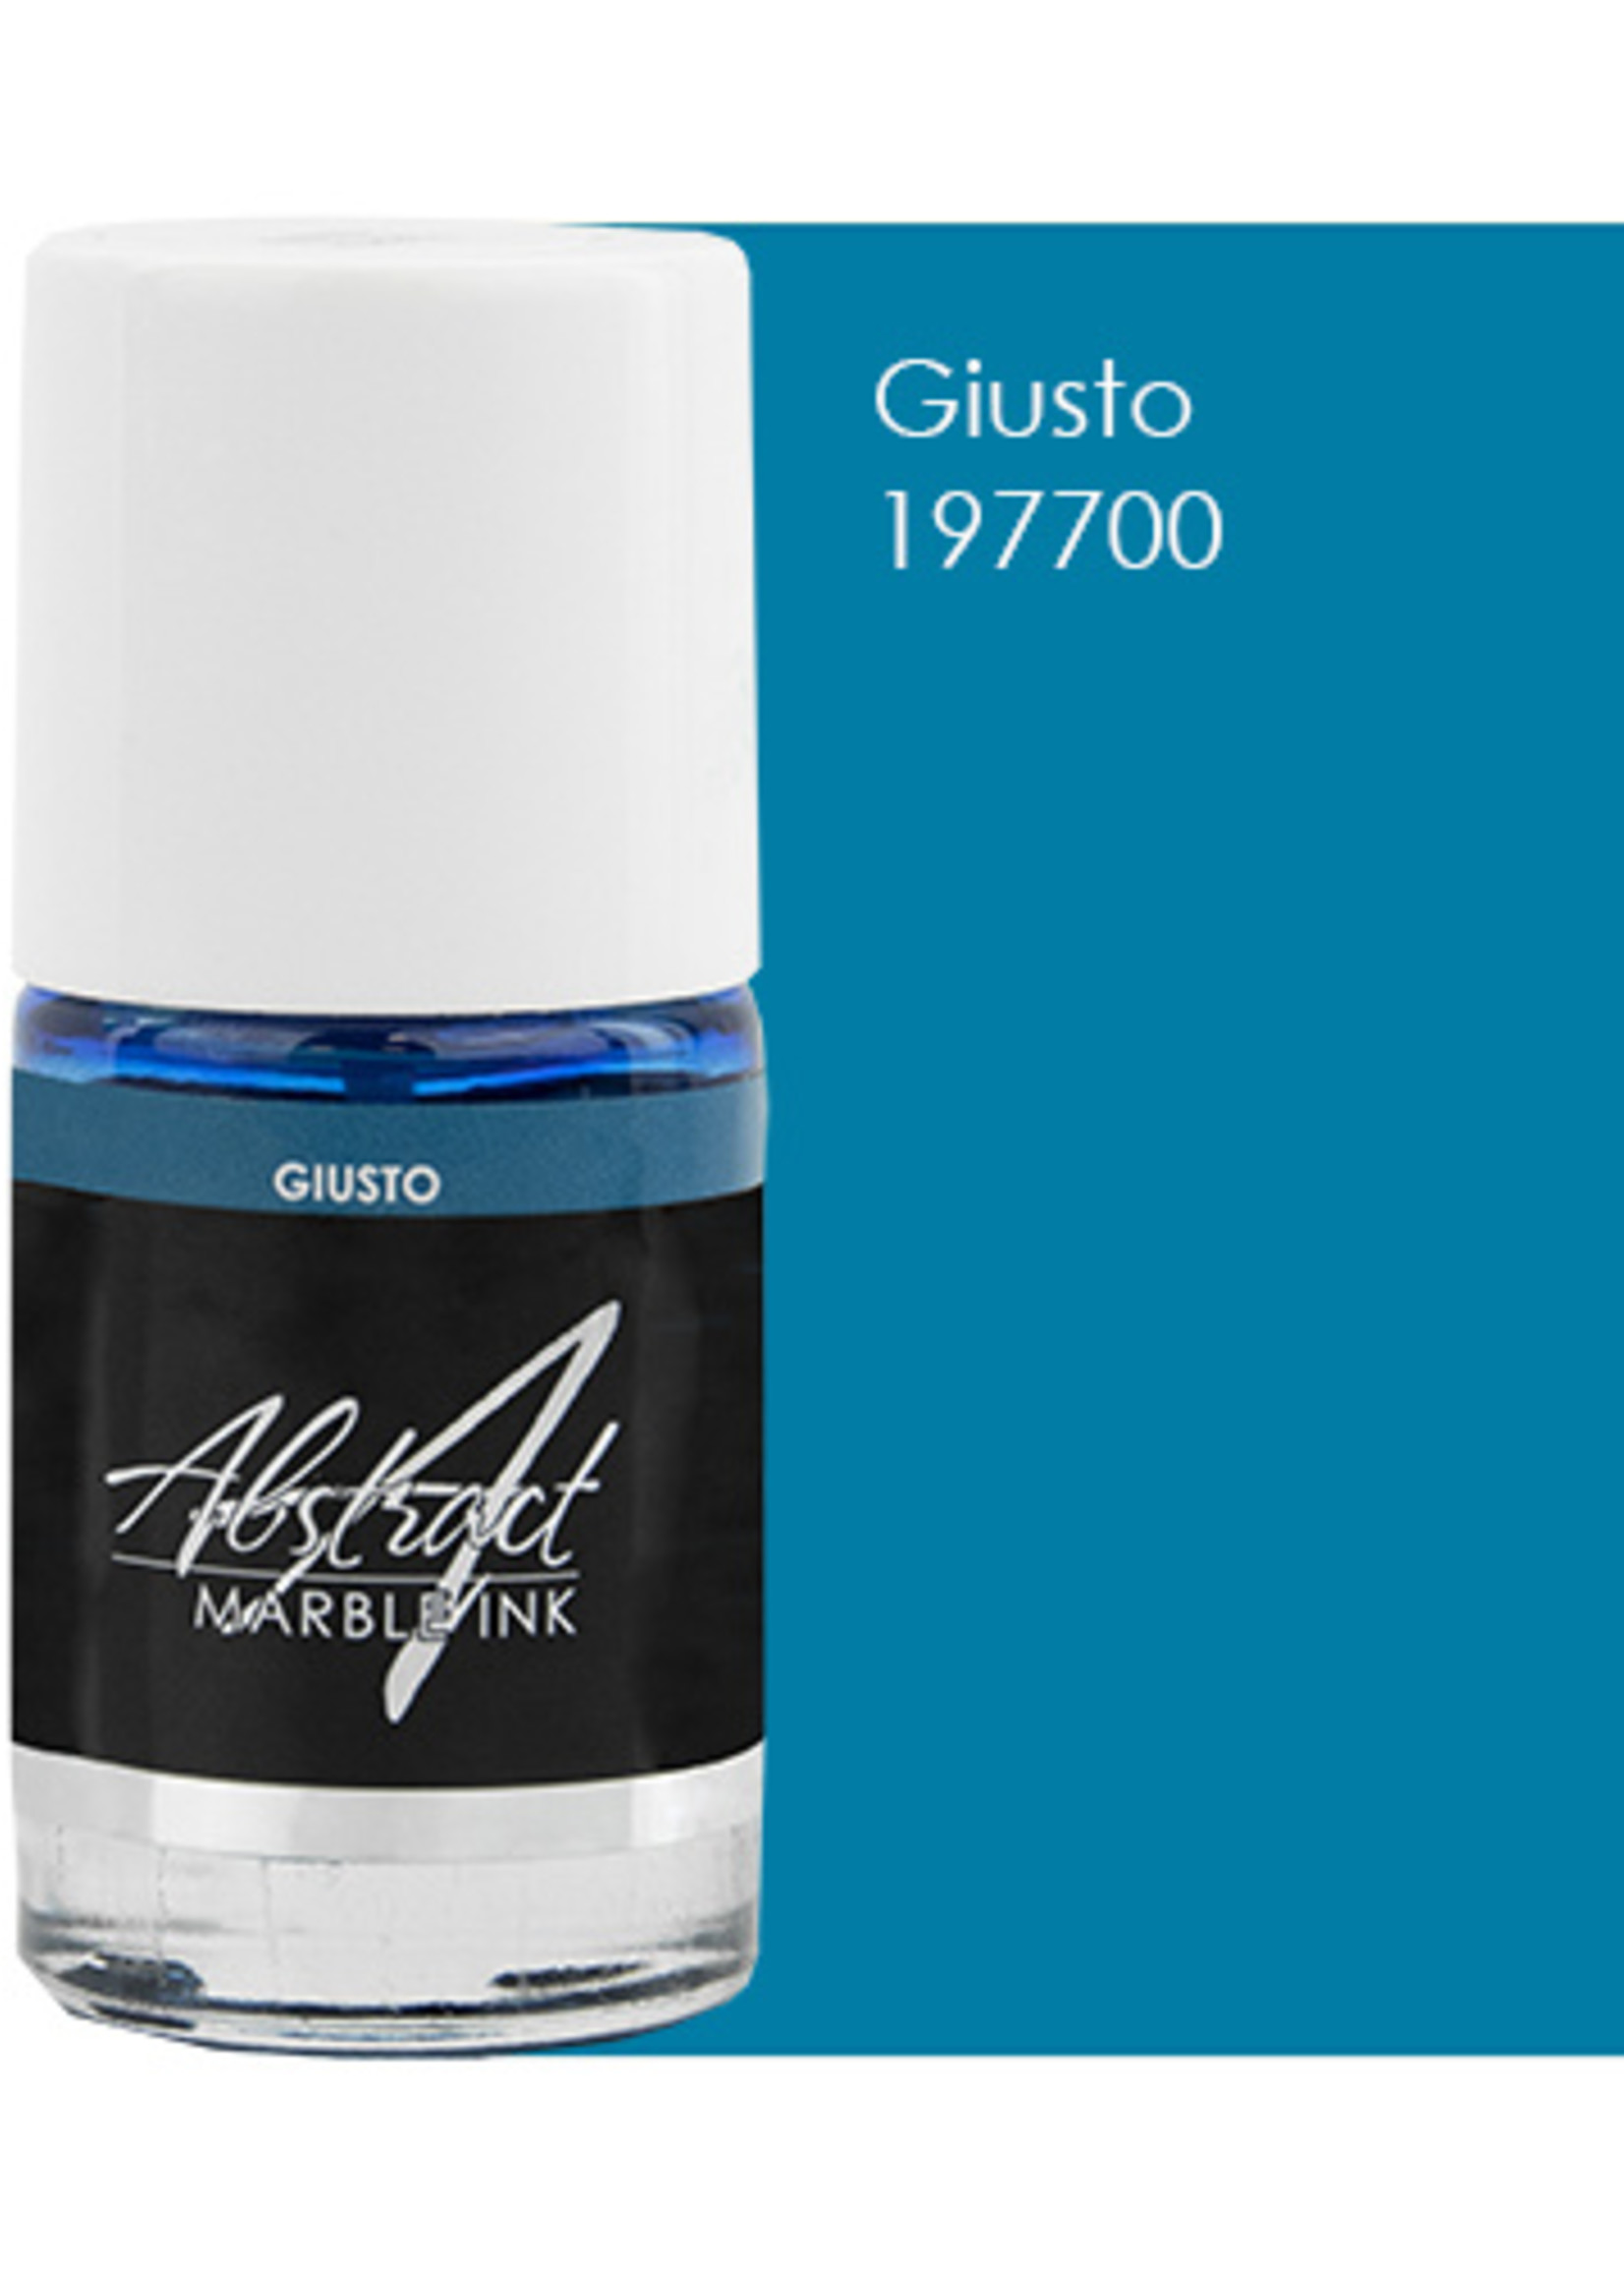 Abstract® Marble Ink 15 ml Giusto